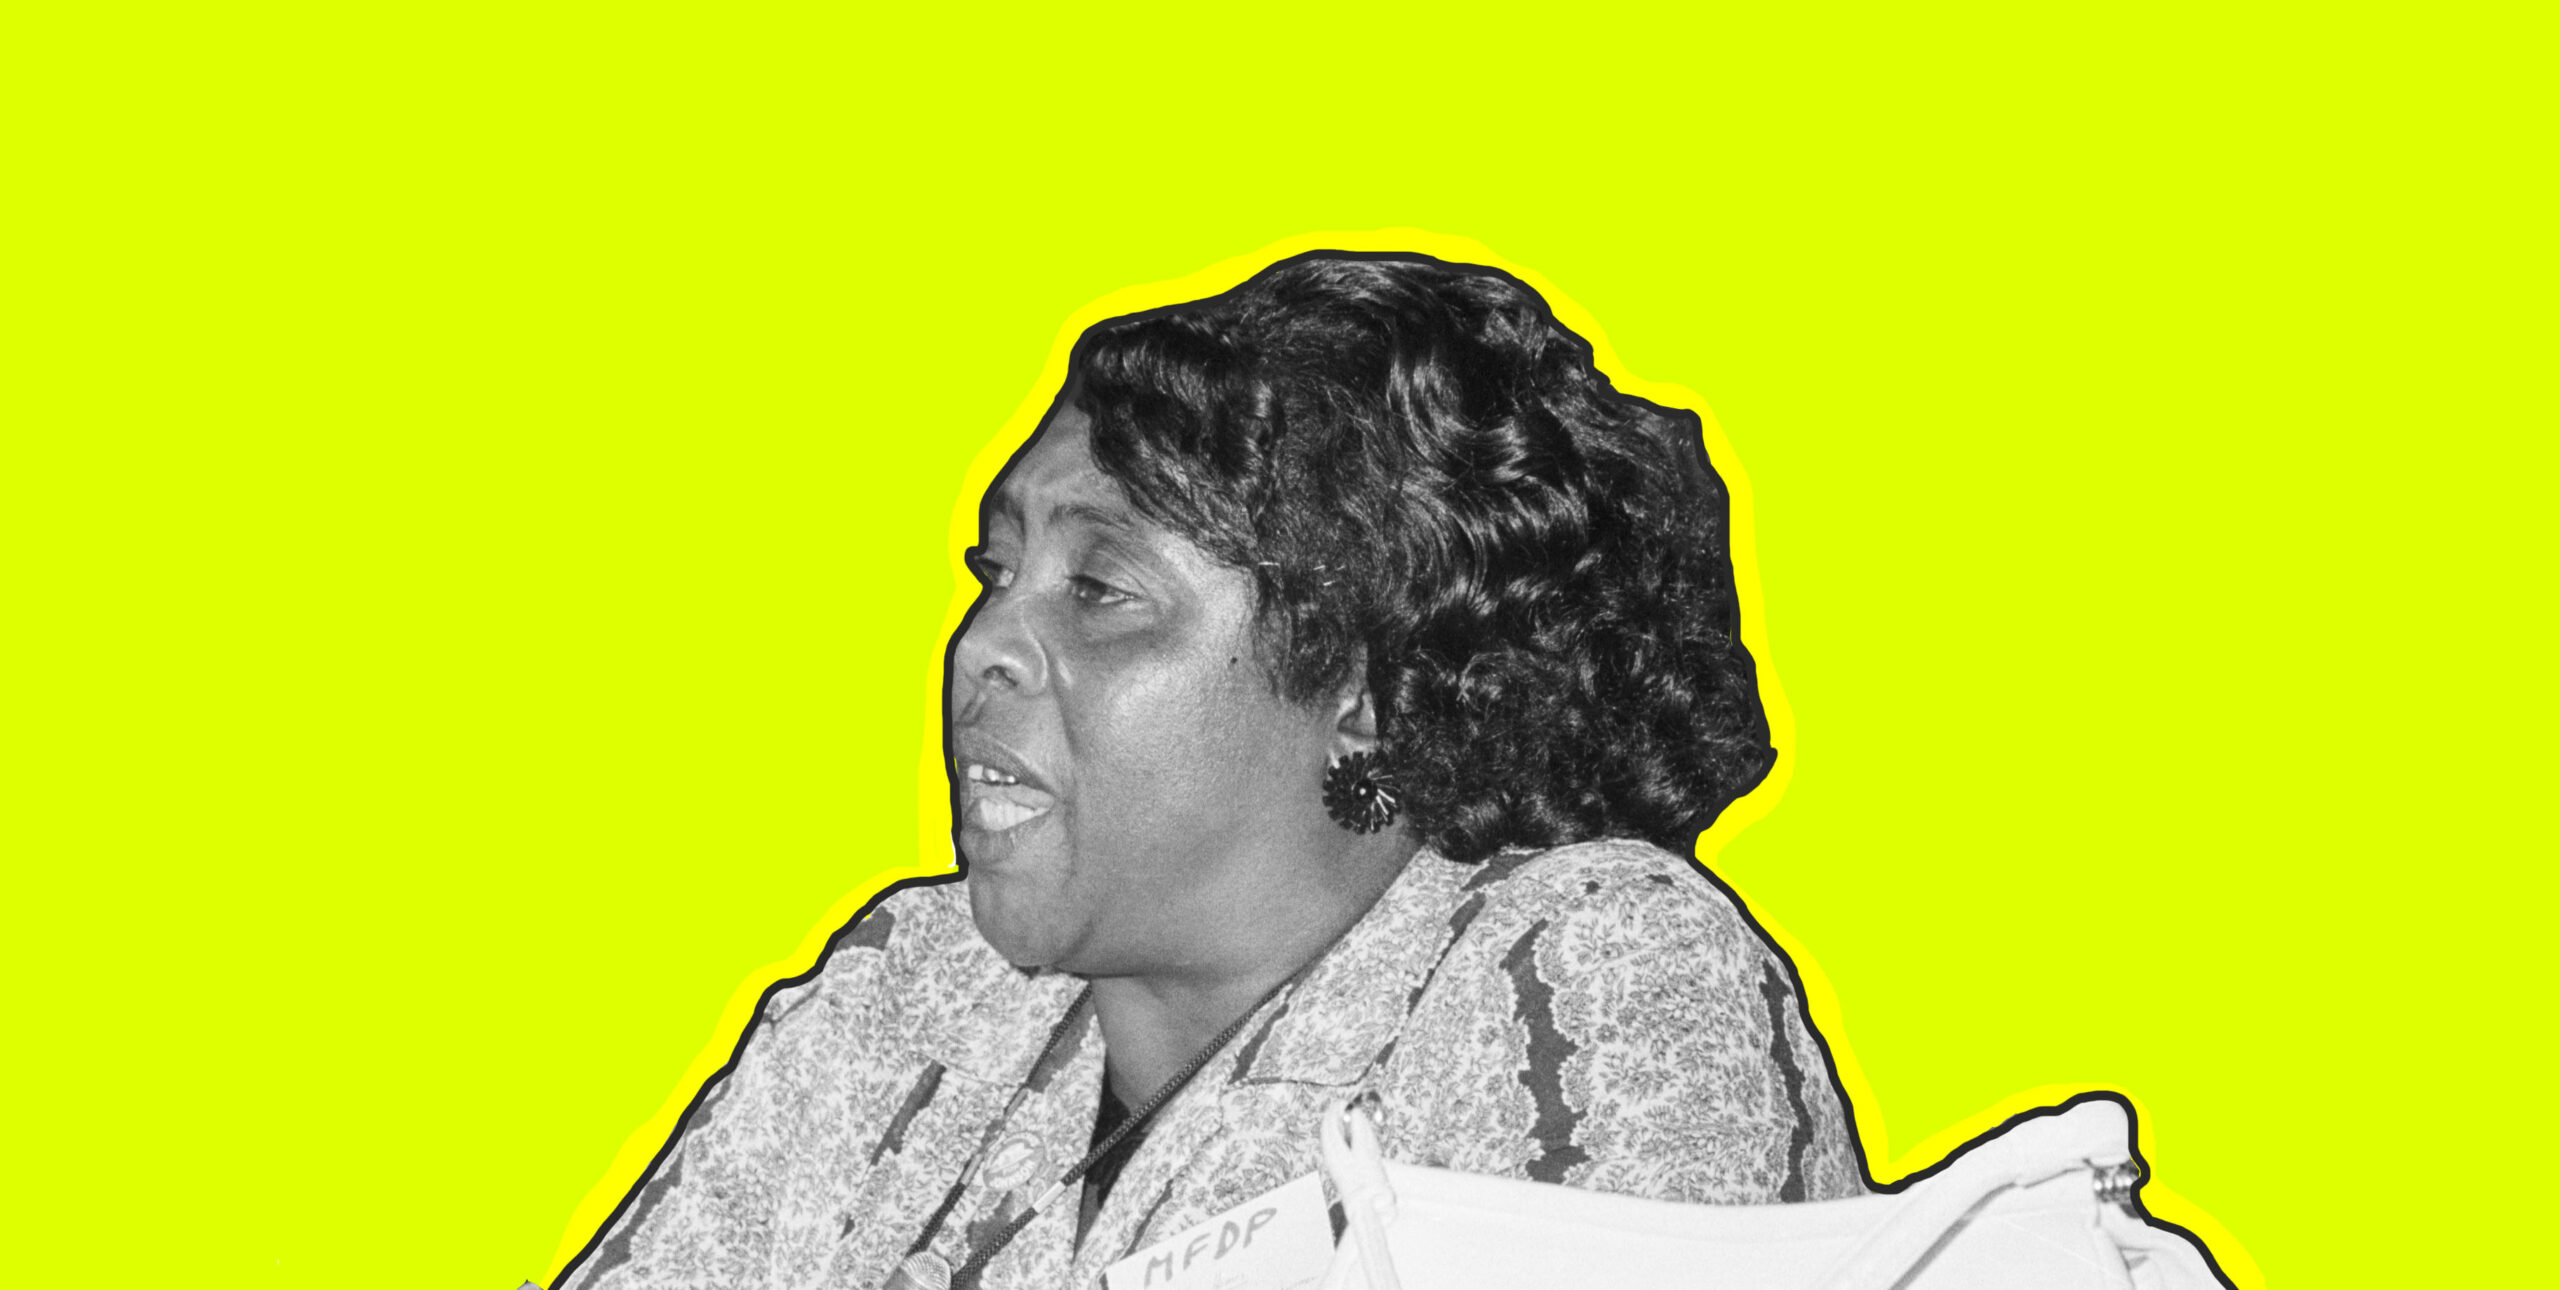 Fannie Lou Hamer Inspired Me To Learn More About Food Justice